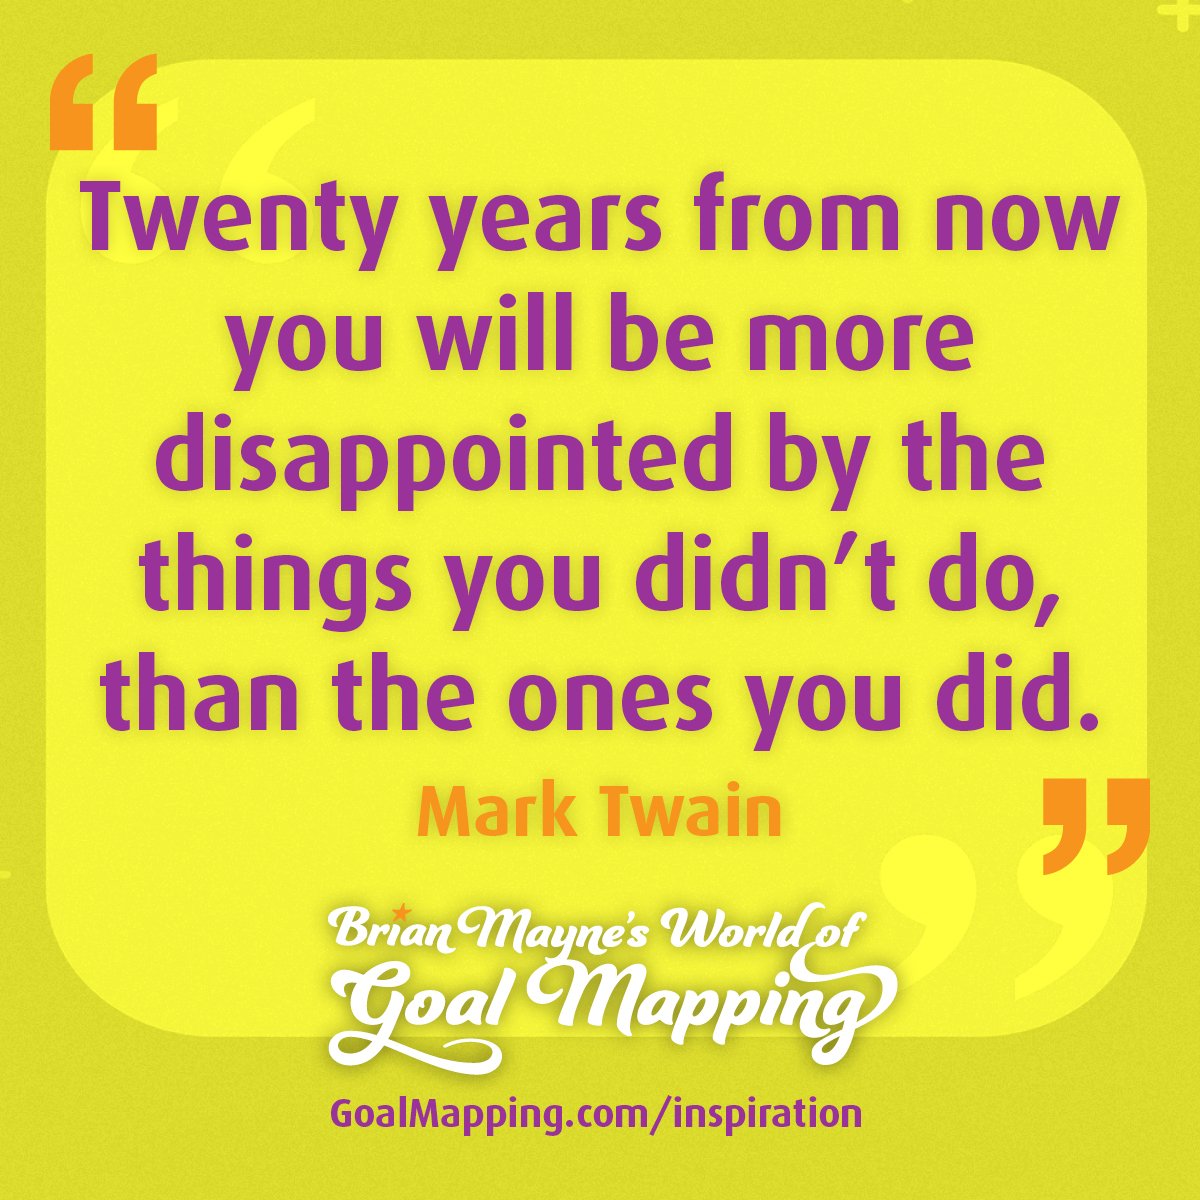 "Twenty years from now you will be more disappointed by the things you didn’t do, than the ones you did." Mark Twain